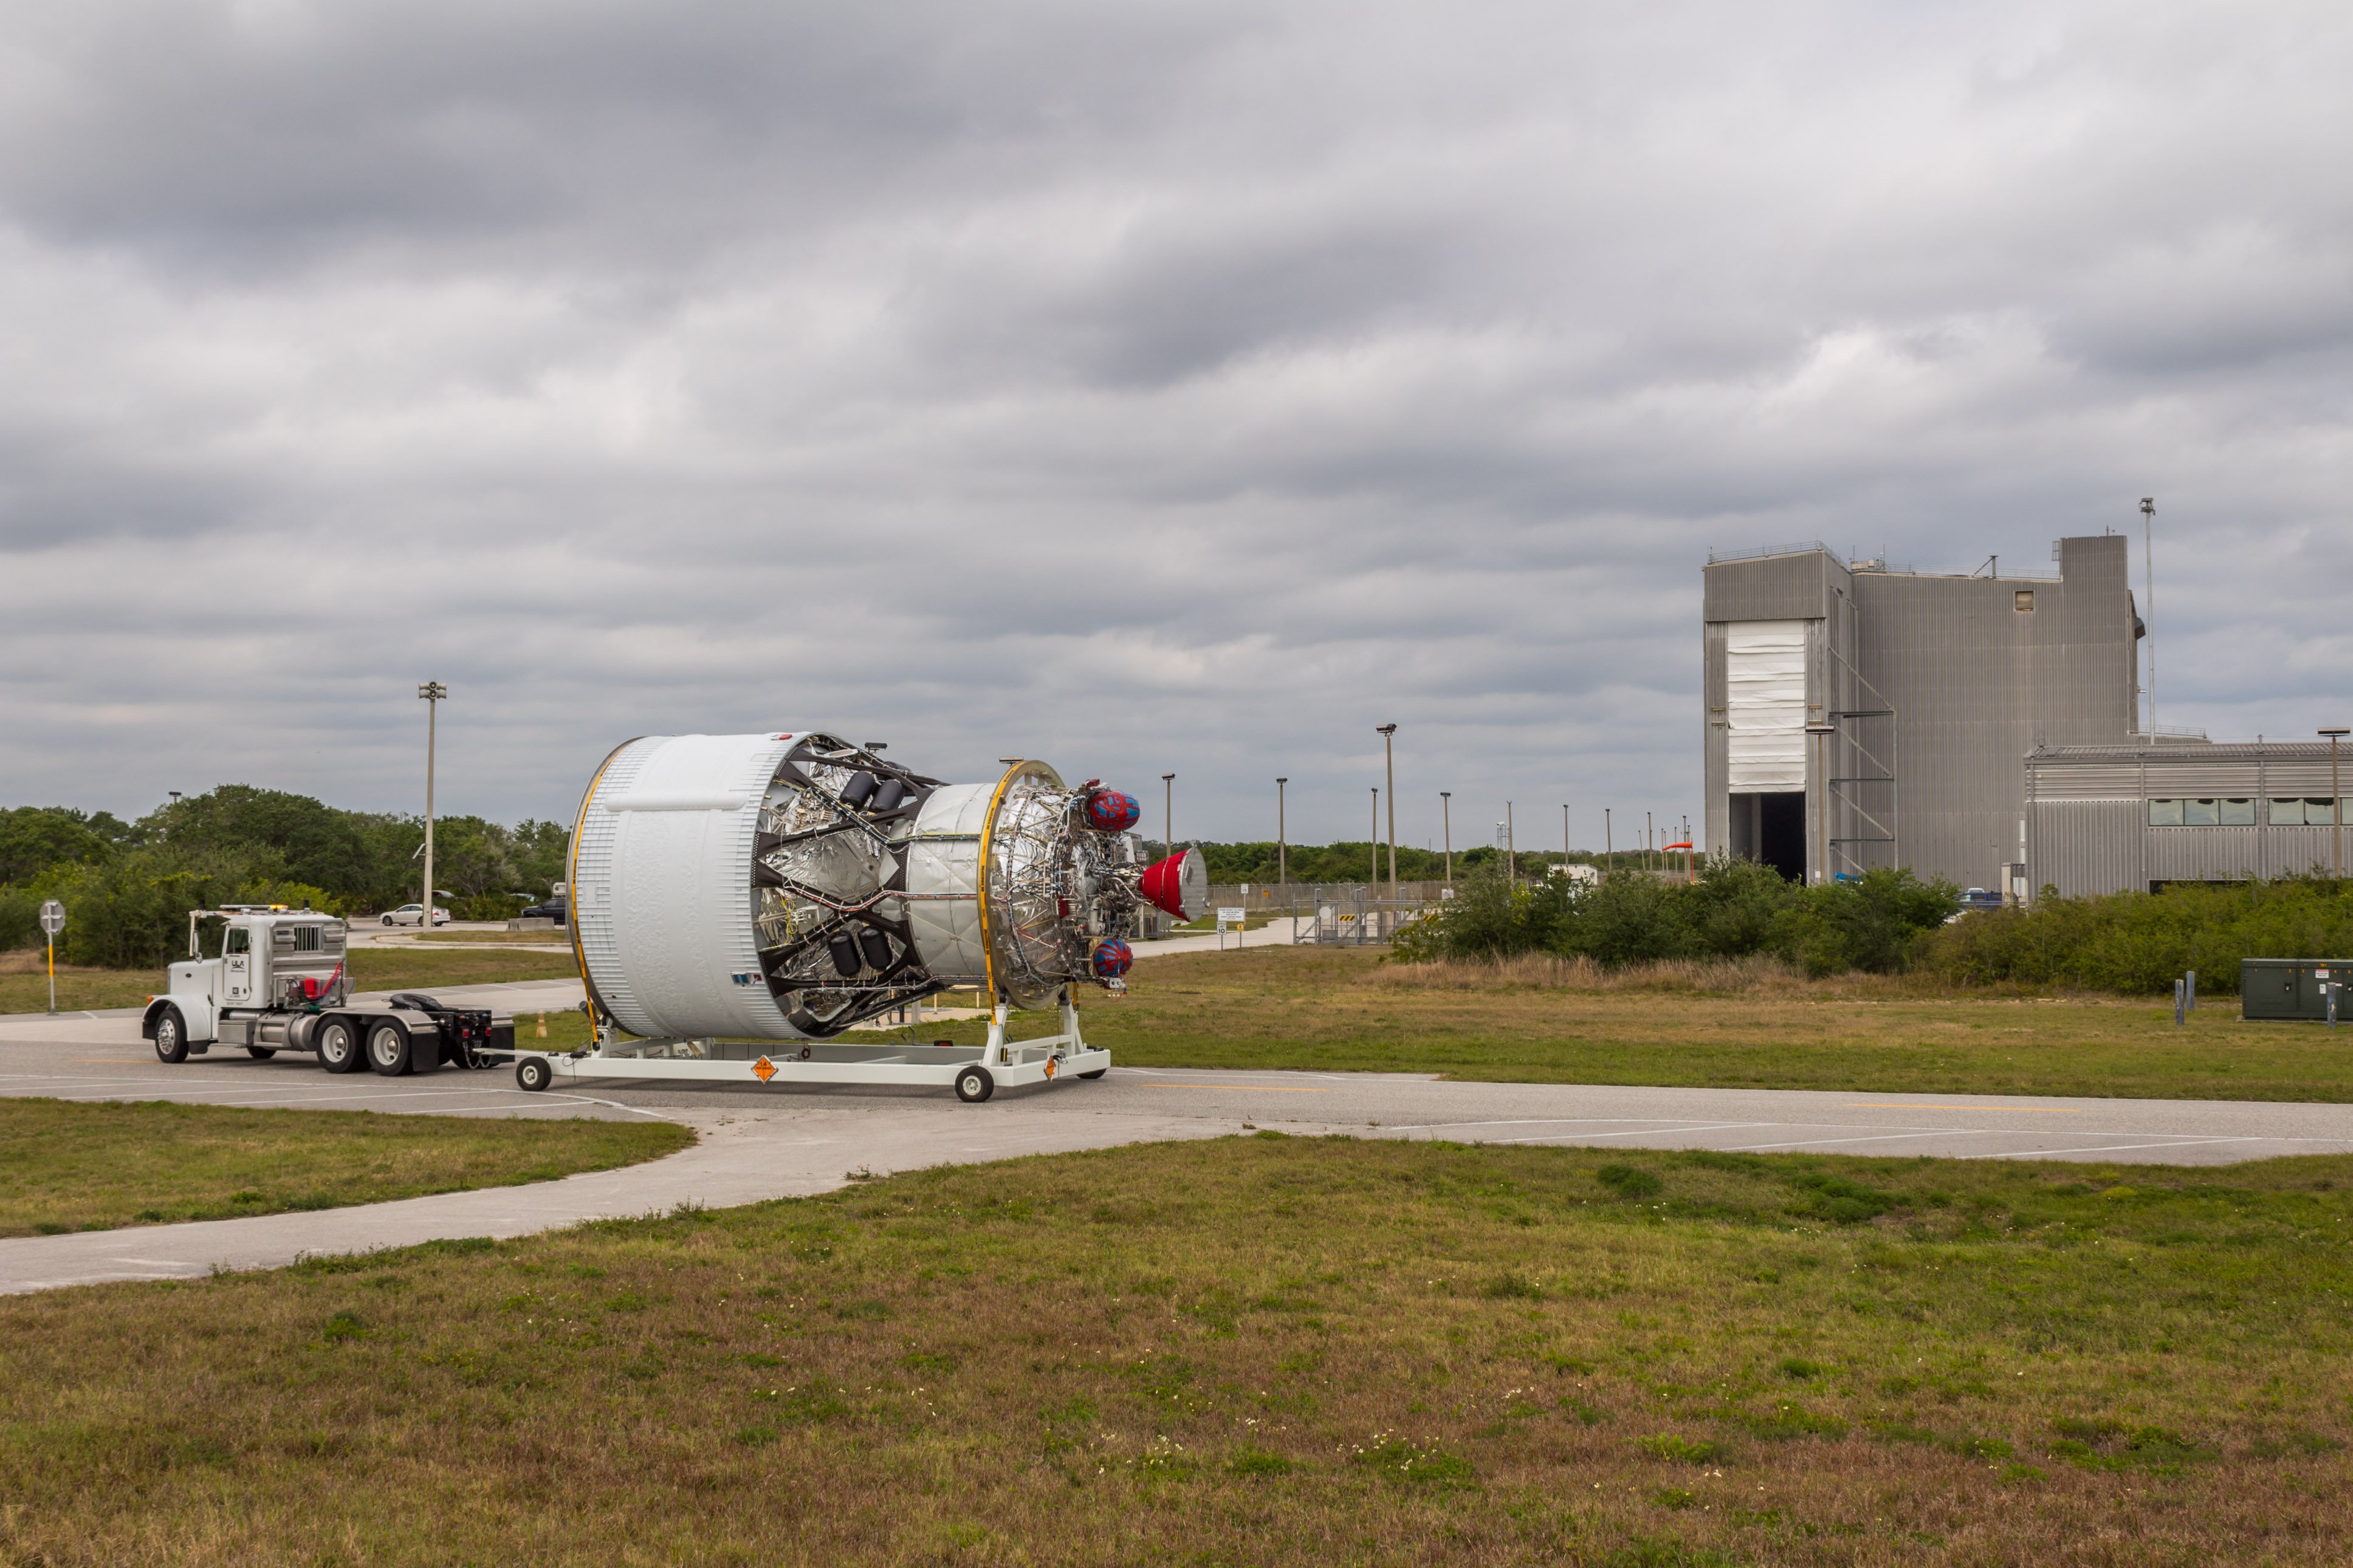 ICPS-2 arrives at the Delta Operations Center to prepare for the Artemis II mission. Photo by United Launch Alliance